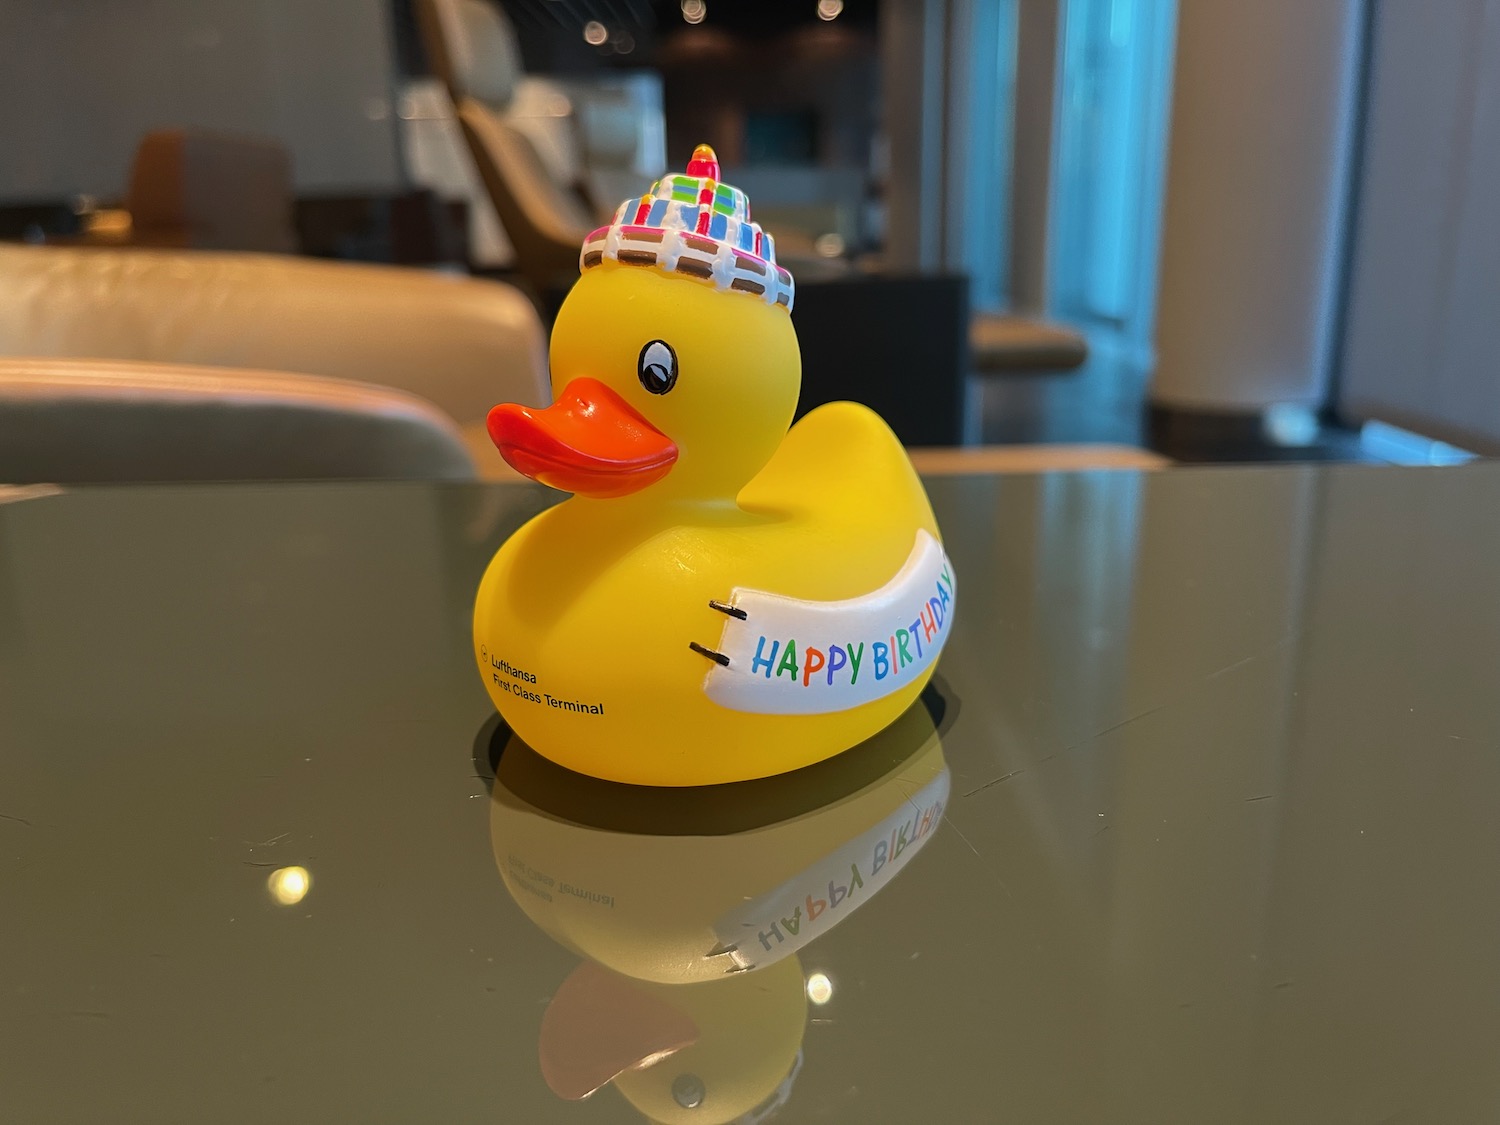 a yellow rubber duck with a hat on a table